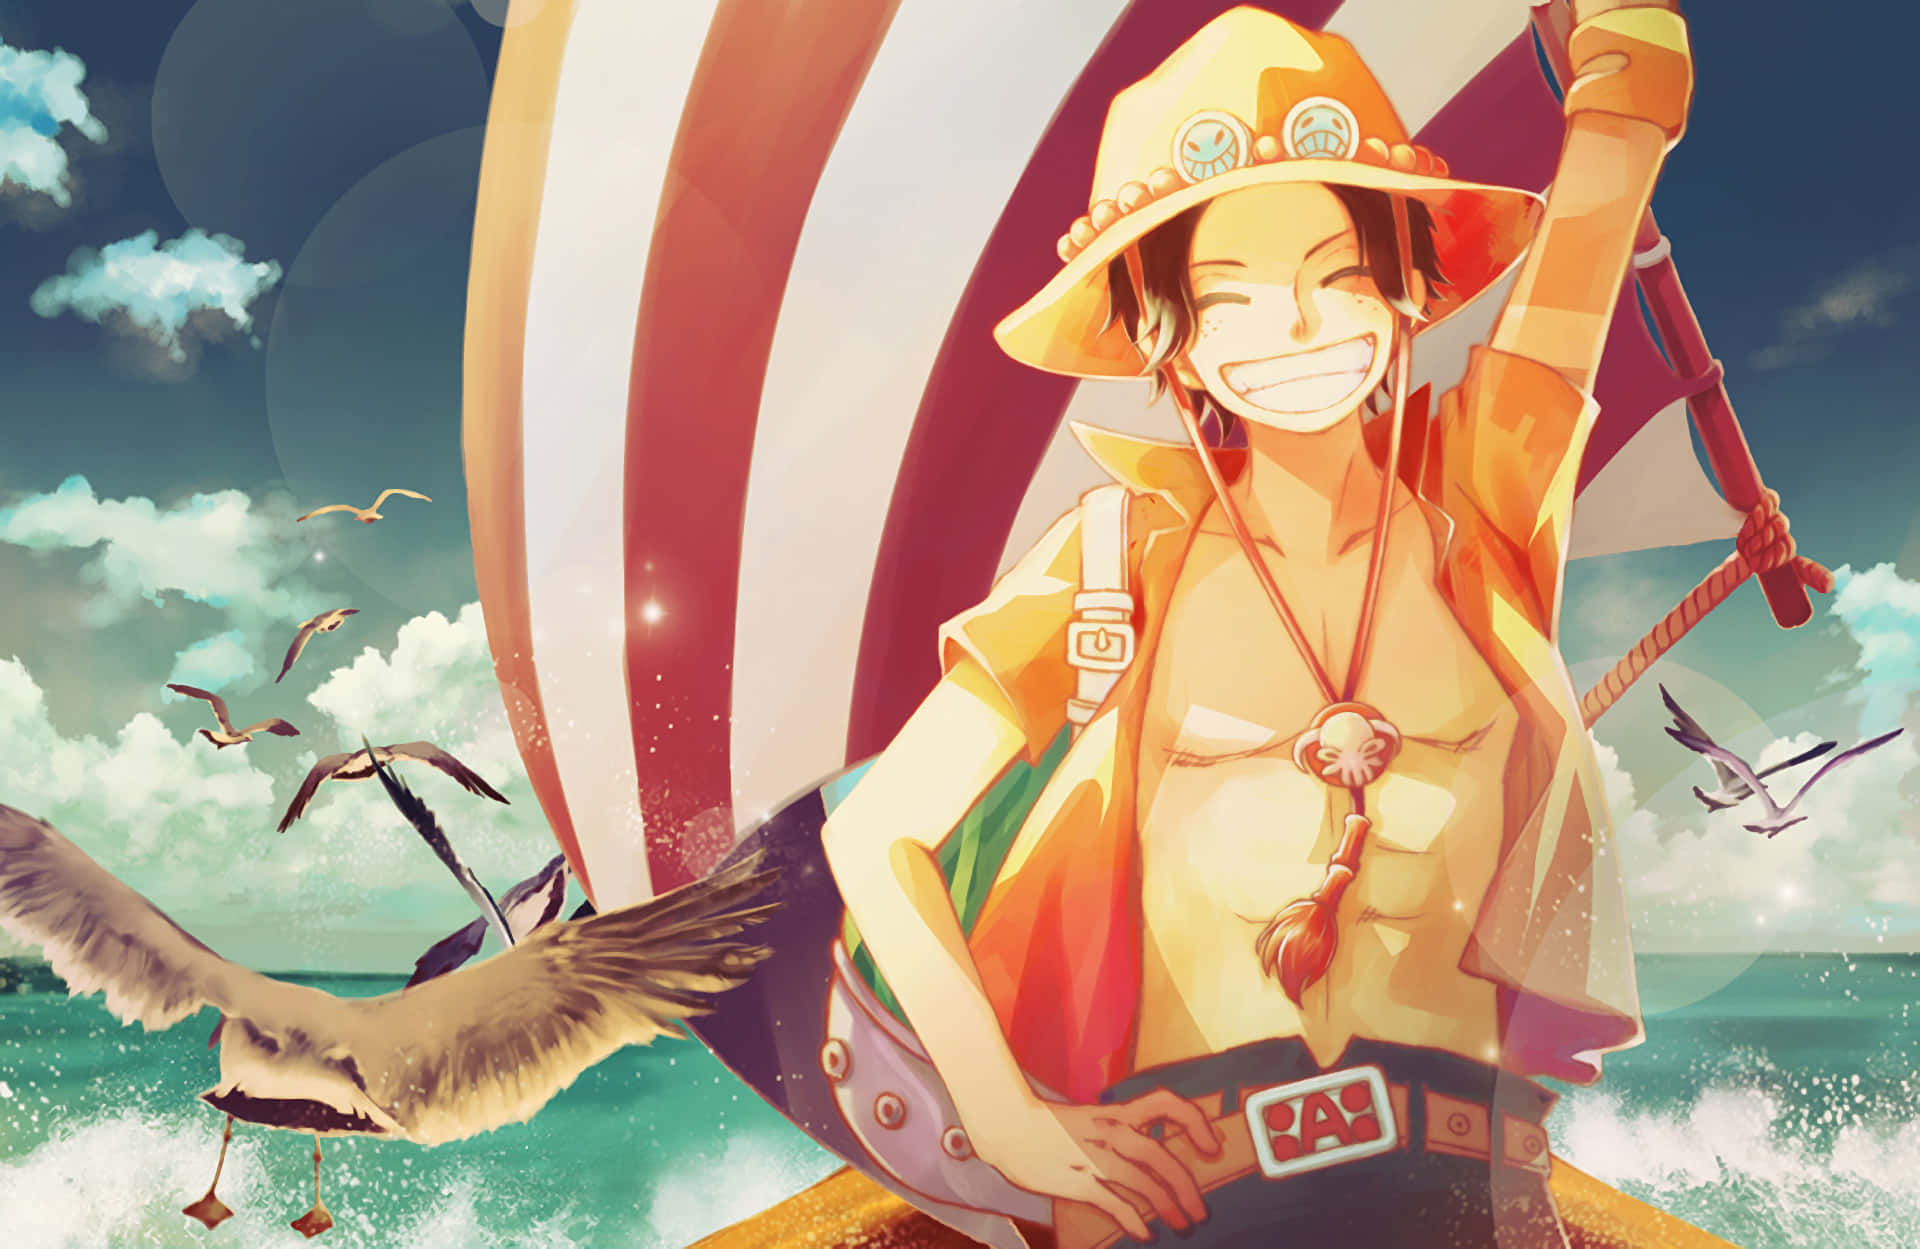 Join the Straw Hat pirates and fight alongside Portgas D Ace! Wallpaper